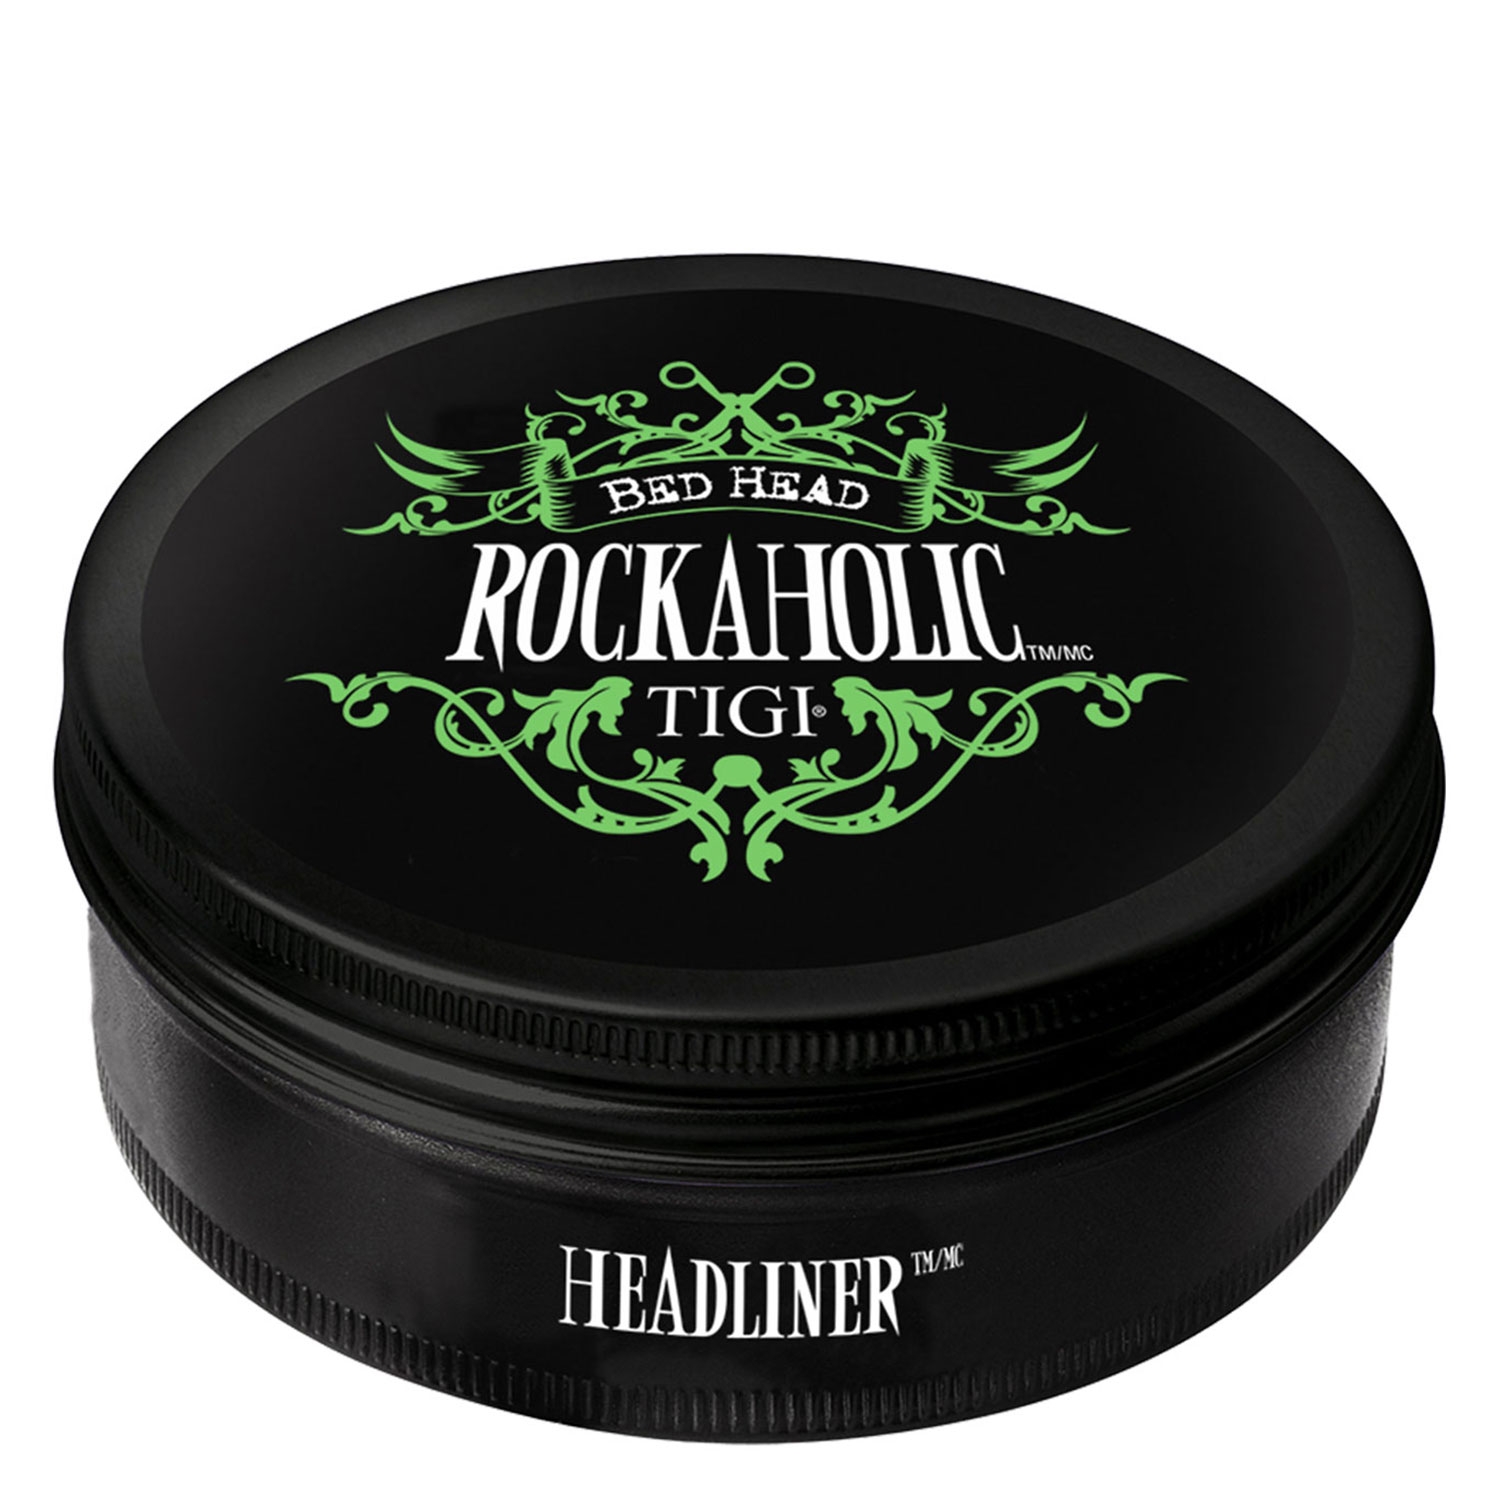 Product image from Bed Head Rockaholic - Headliner Styling Paste